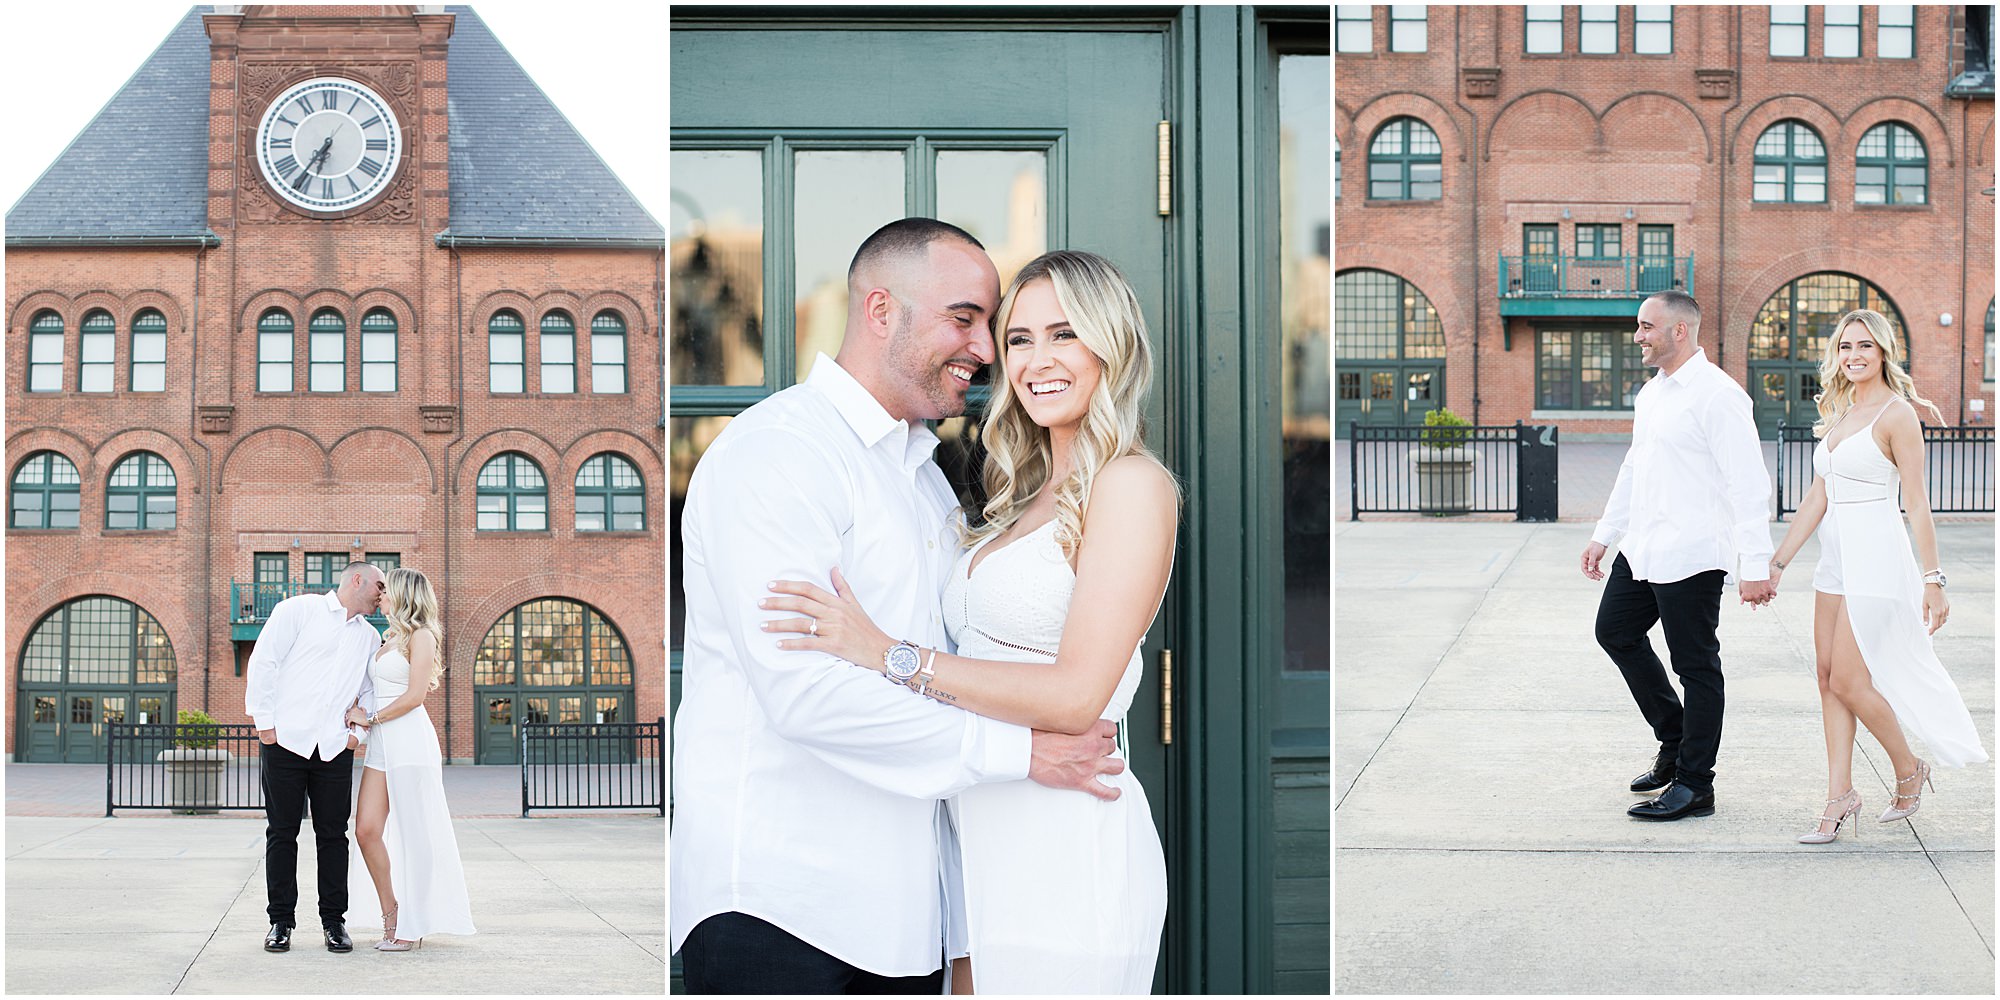 New Jersey Engagement Photo Locations: Liberty State Park